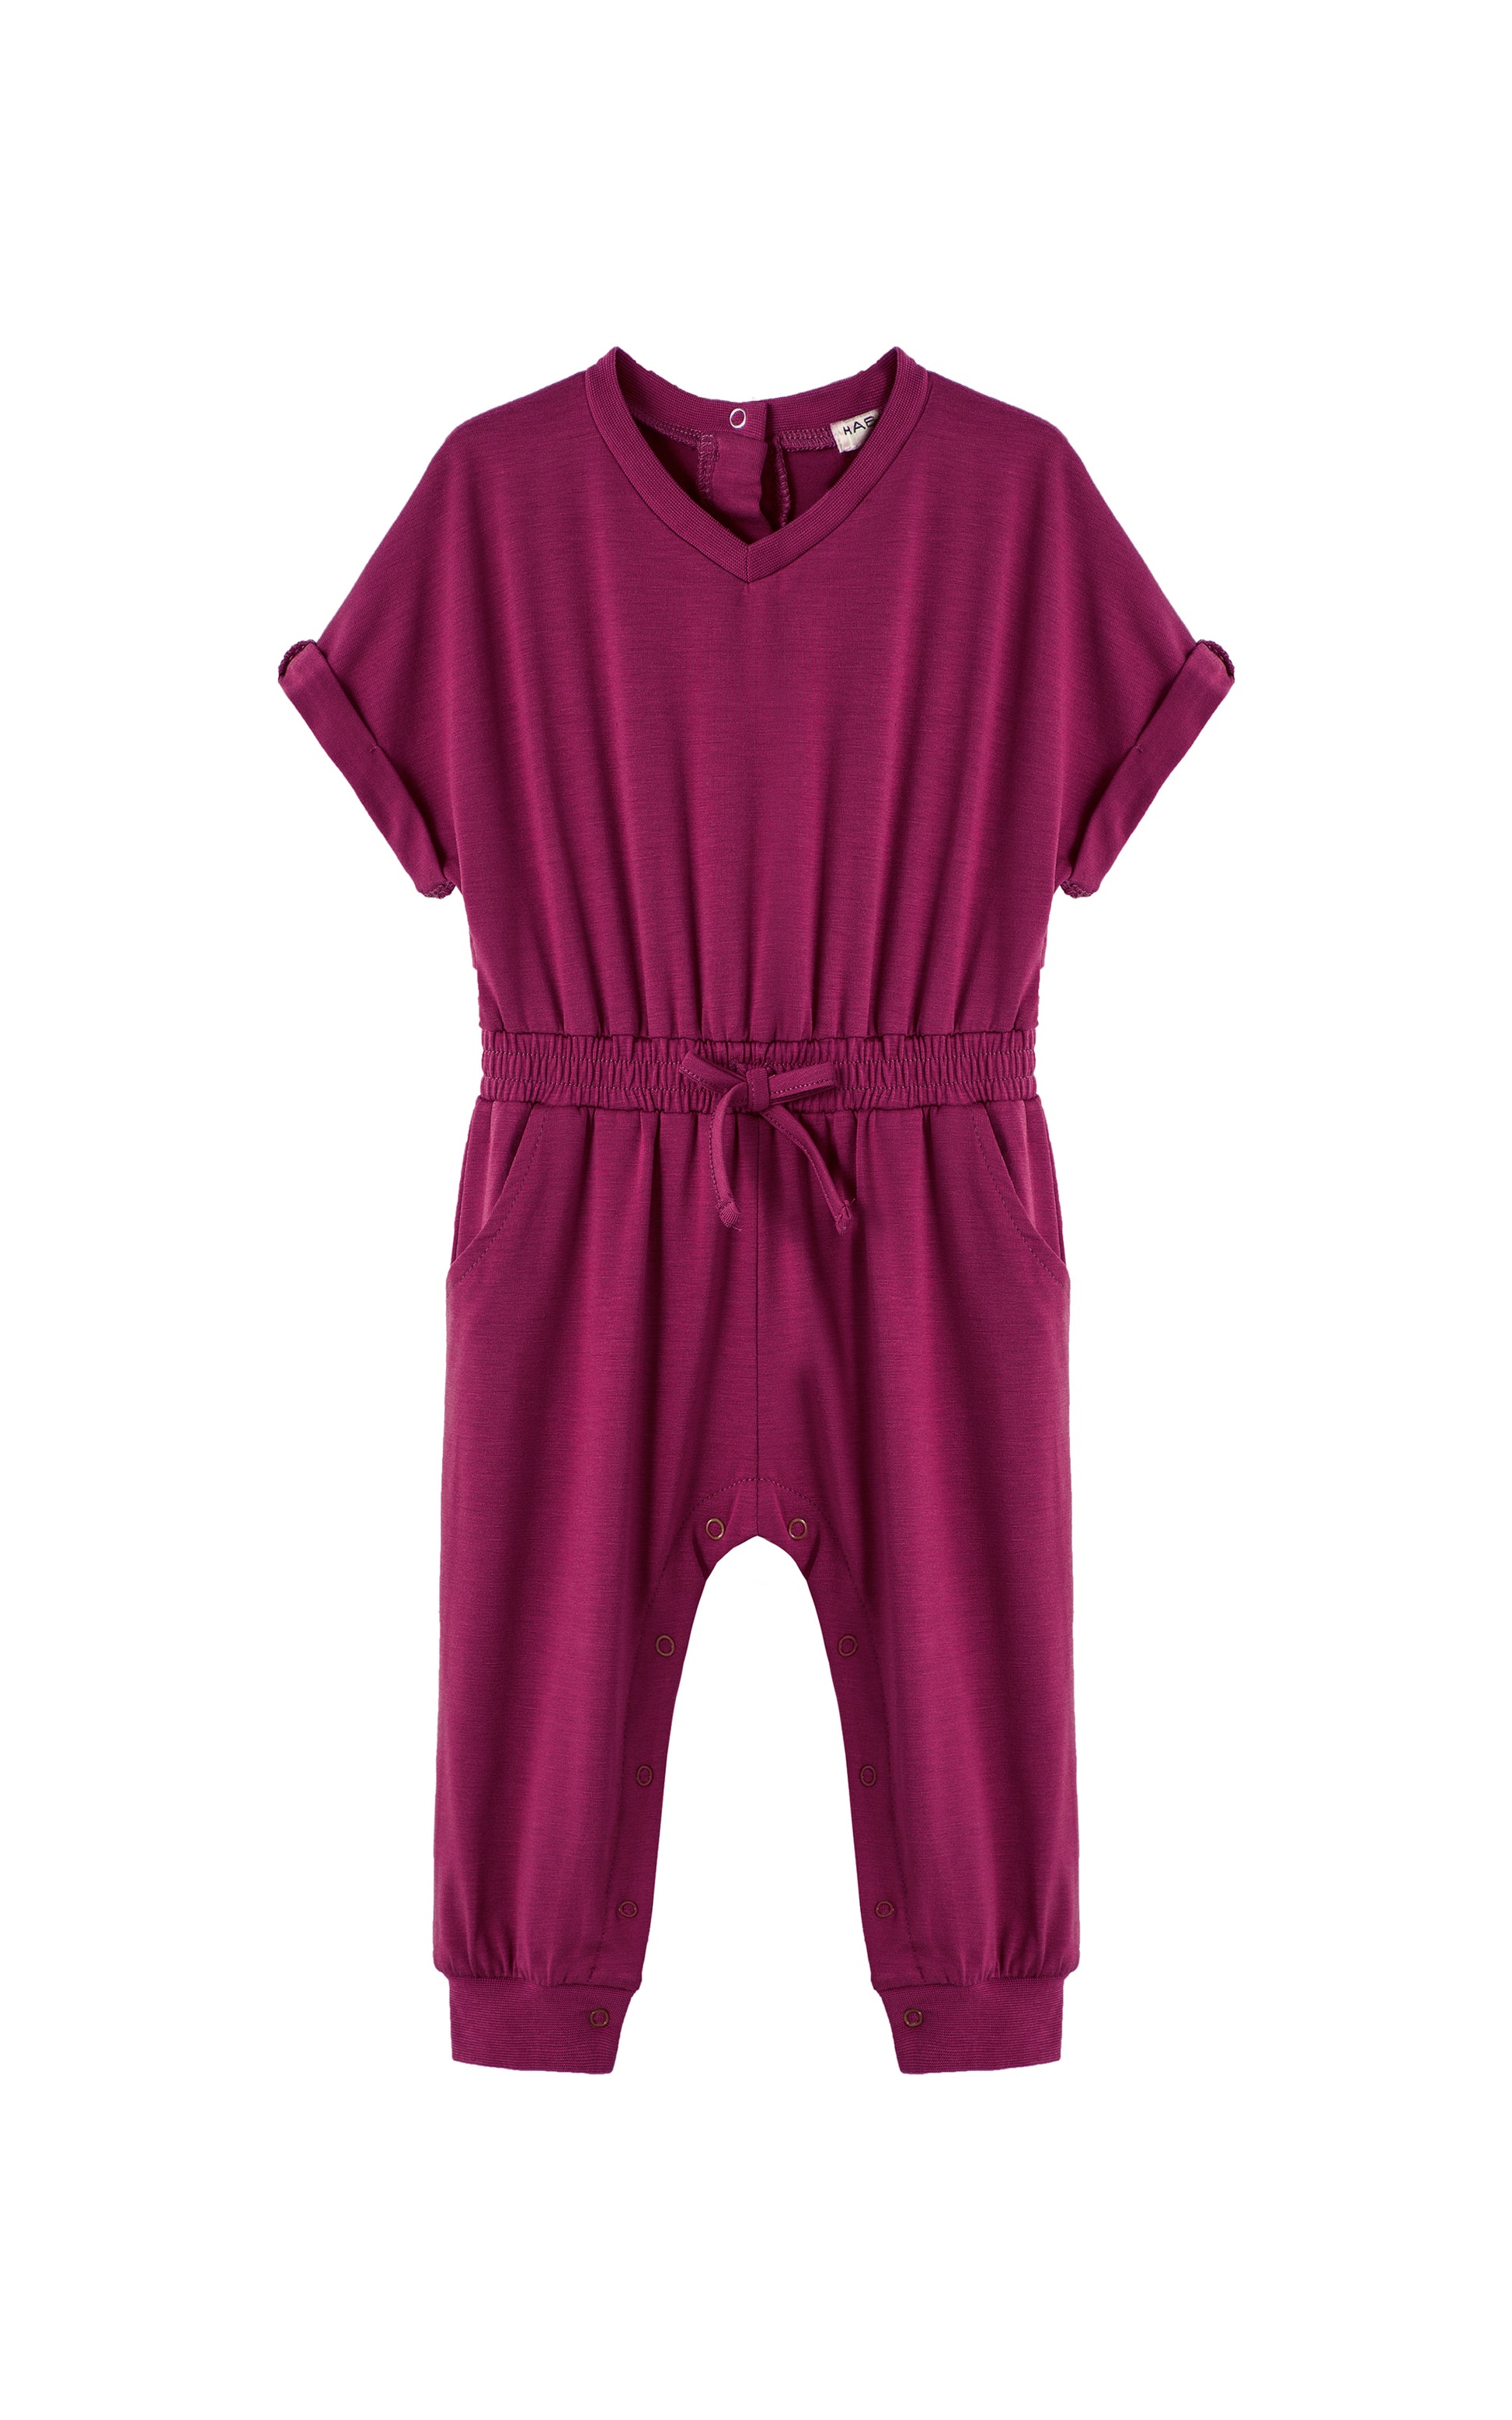 Plum-colored romper with folded cuff sleeves and tie at waist. 